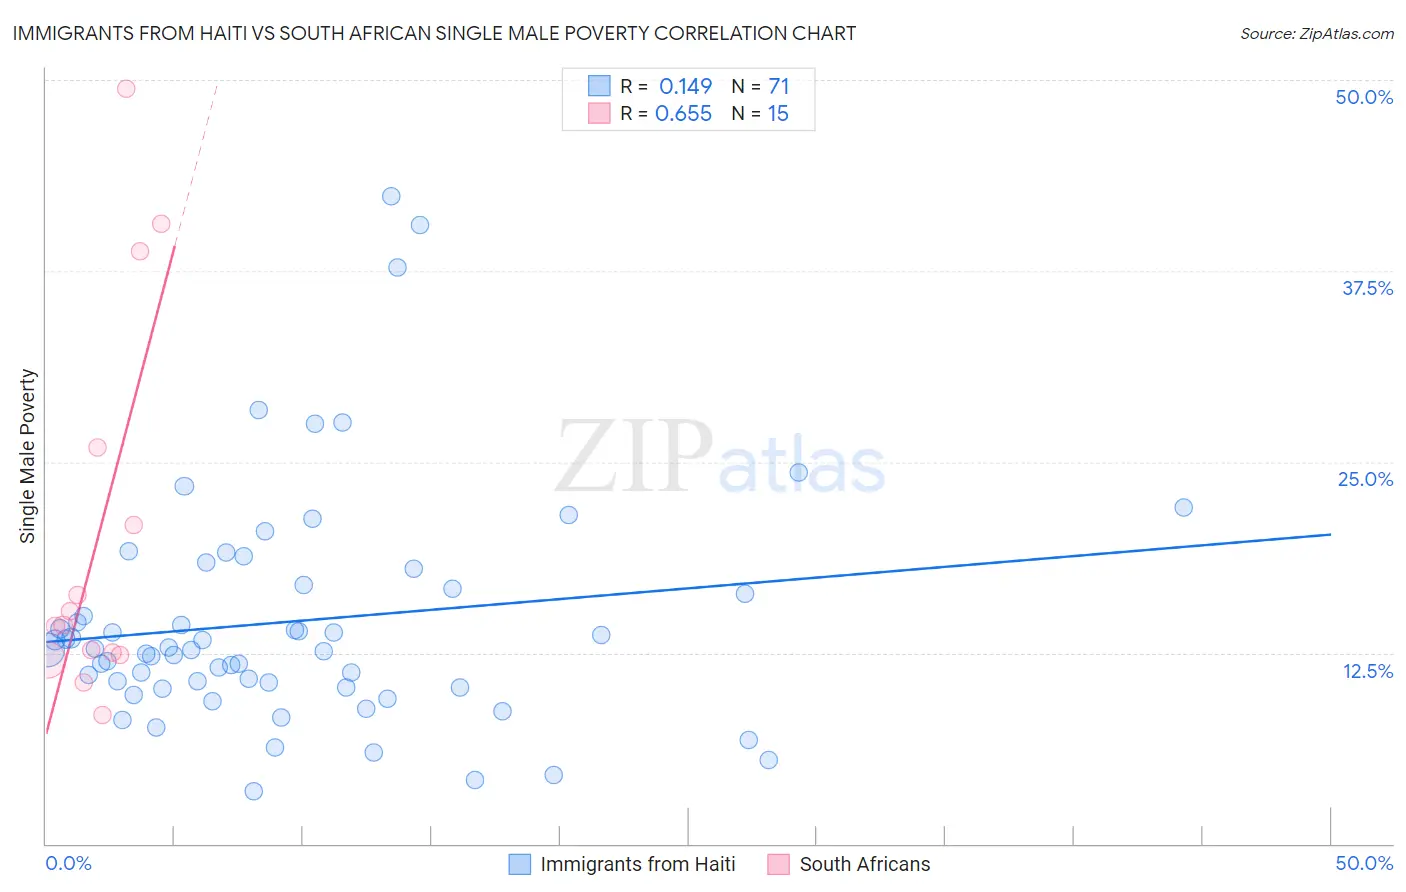 Immigrants from Haiti vs South African Single Male Poverty